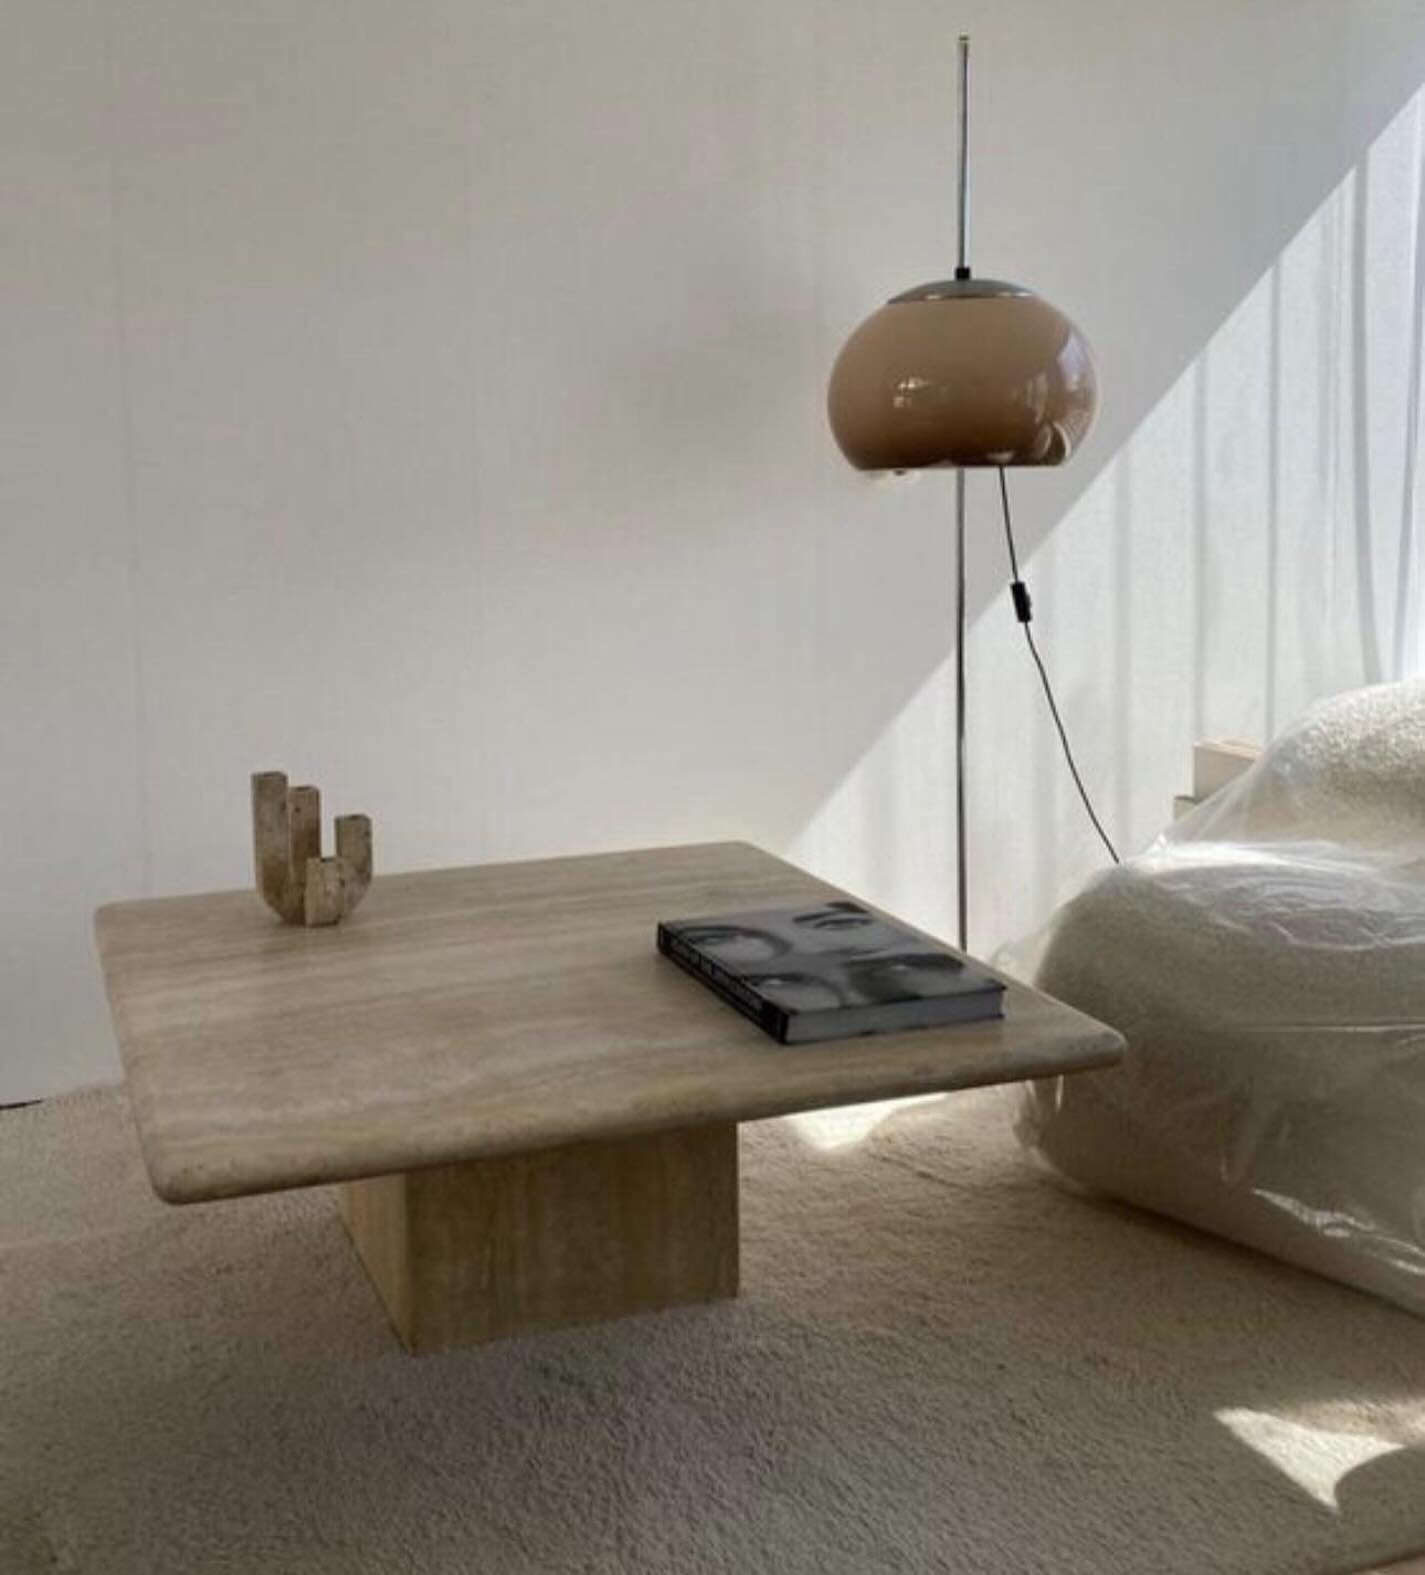 VV l Our new classic travertine table, highly sought after by decorators, architects and lovers of Art &amp; Design, is now online.

#vvinteriorhome #interiordesign #interiorstylist #1stdibs #interiordesign #moderndesign #contemporarydesign 

Photo @